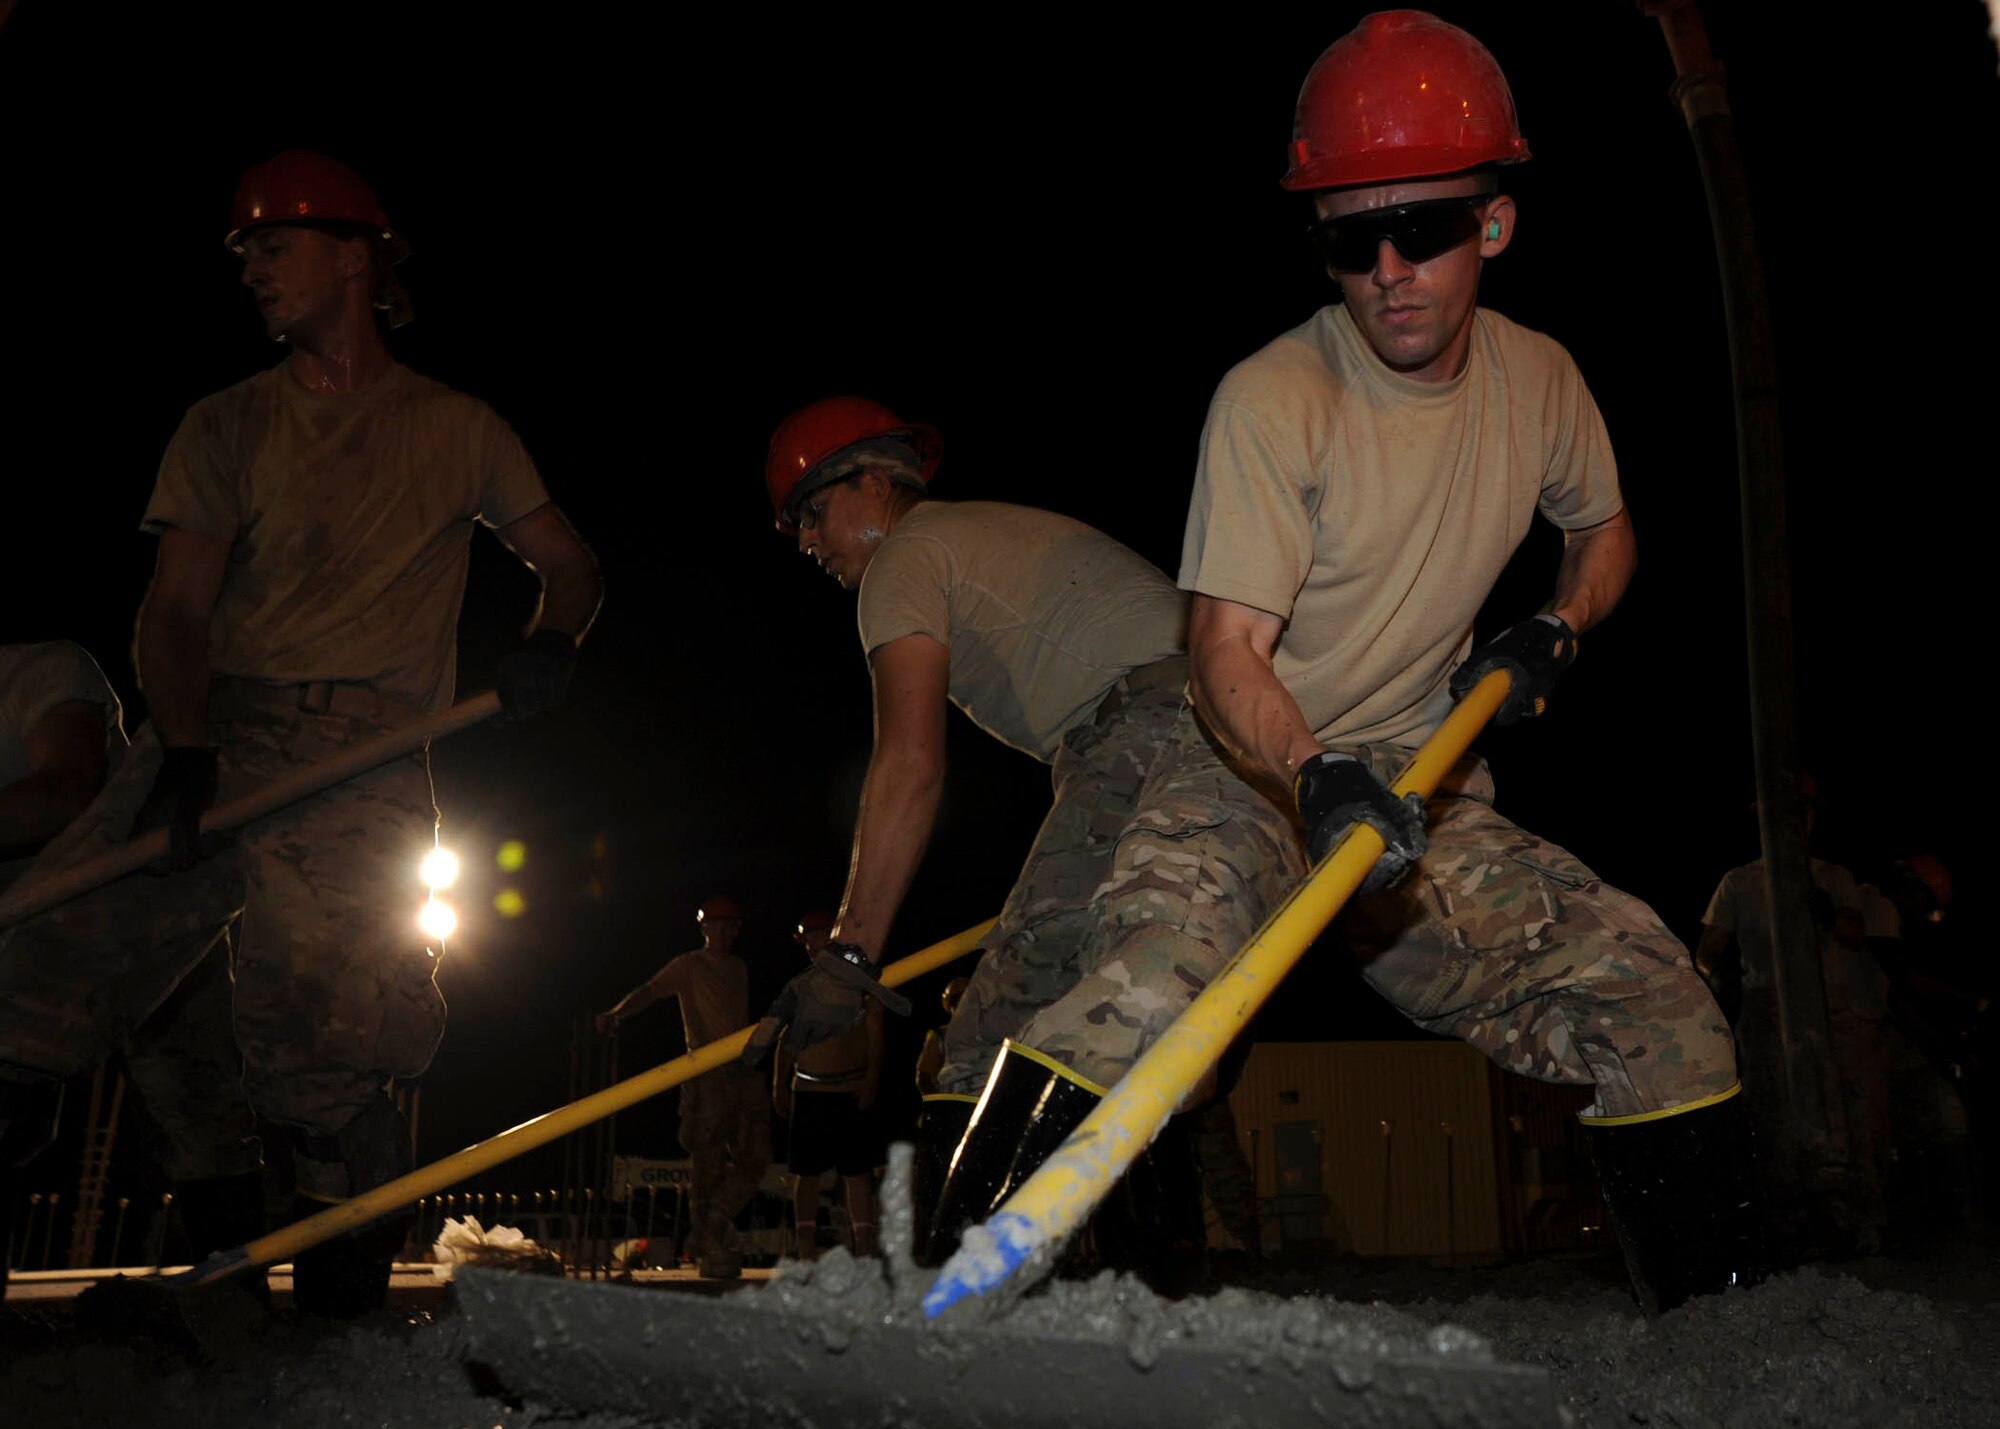 Senior Airman Lance Mendelson uses a concrete rake to distribute wet concrete at the 379th Air Expeditionary Wing in Southwest Asia, July 9, 2013. The 557th Expeditionary RED HORSE Squadron is building a Contingency Aeromedical Staging Facility that will house and provide medical care to wounded service members prior to medical evacuation. Mendelson is a 557th ERHS water and fuels systems maintenance journeyman deployed from Malstrom Air Force Base, Mont. (U.S. Air Force photo/Senior Airman Bahja J. Jones) 